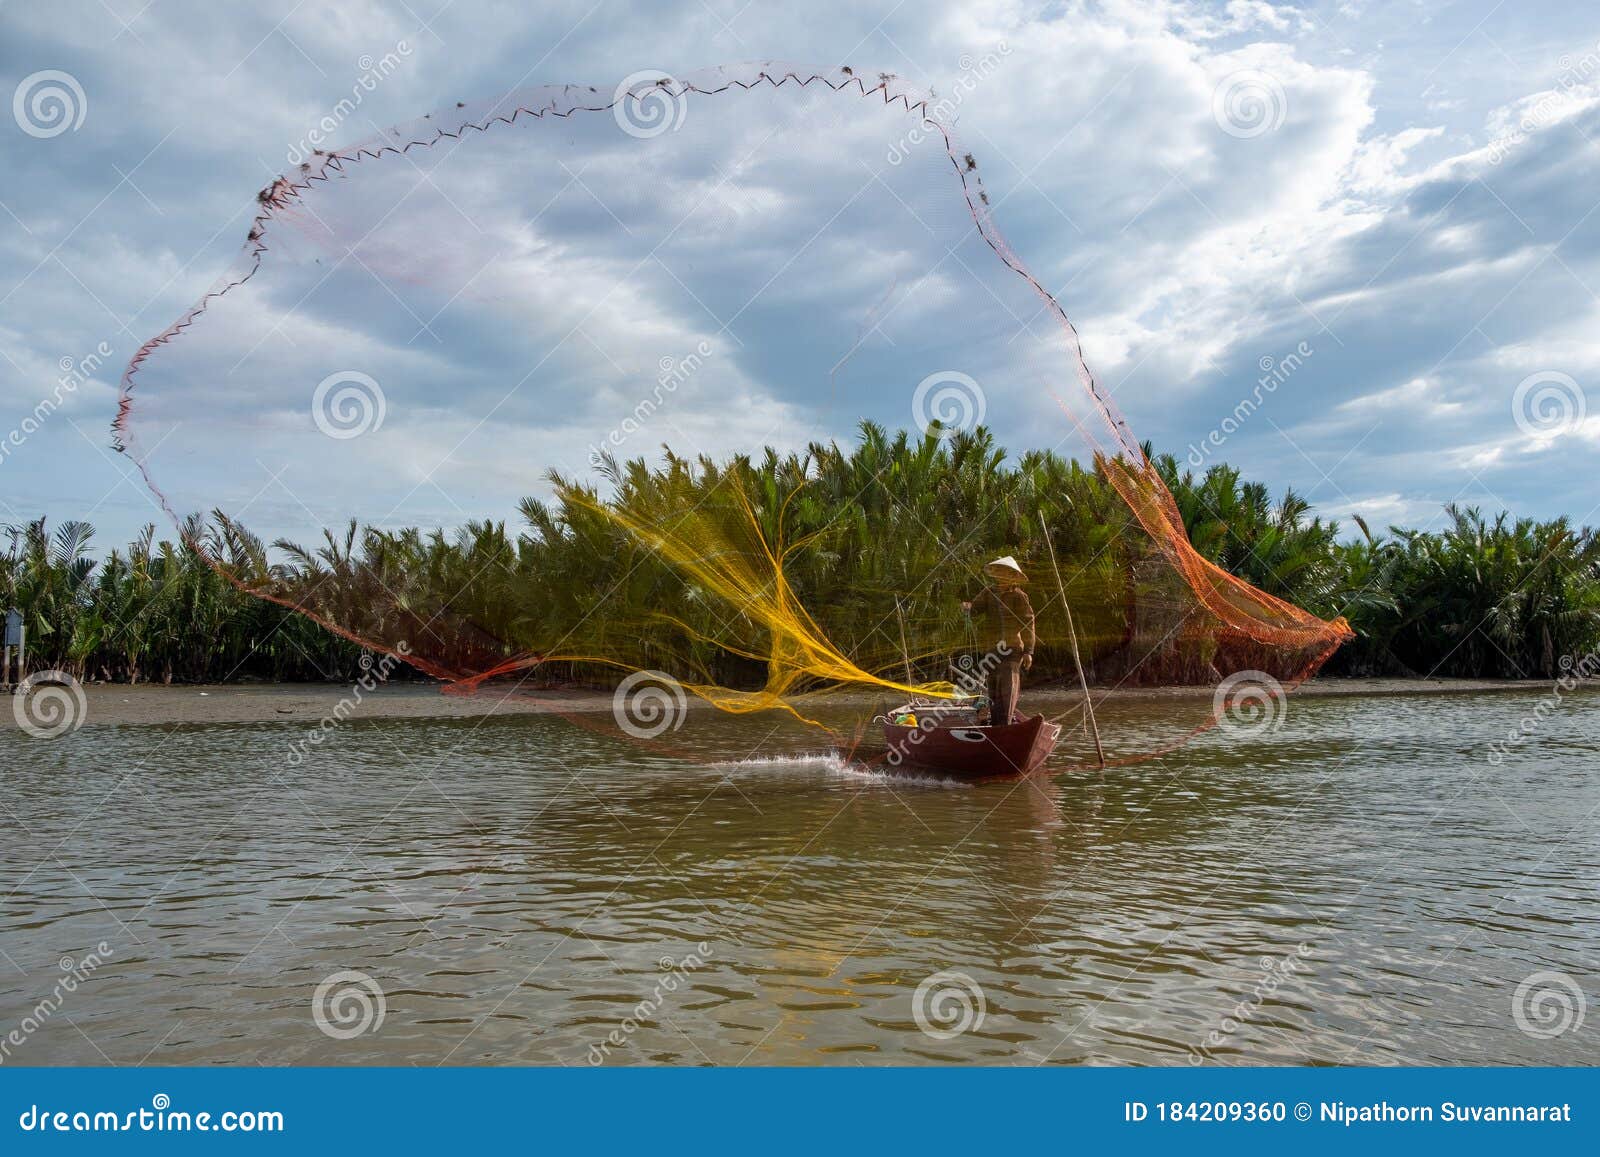 Silhouette of Fisherman Casting Fishing Net into the River